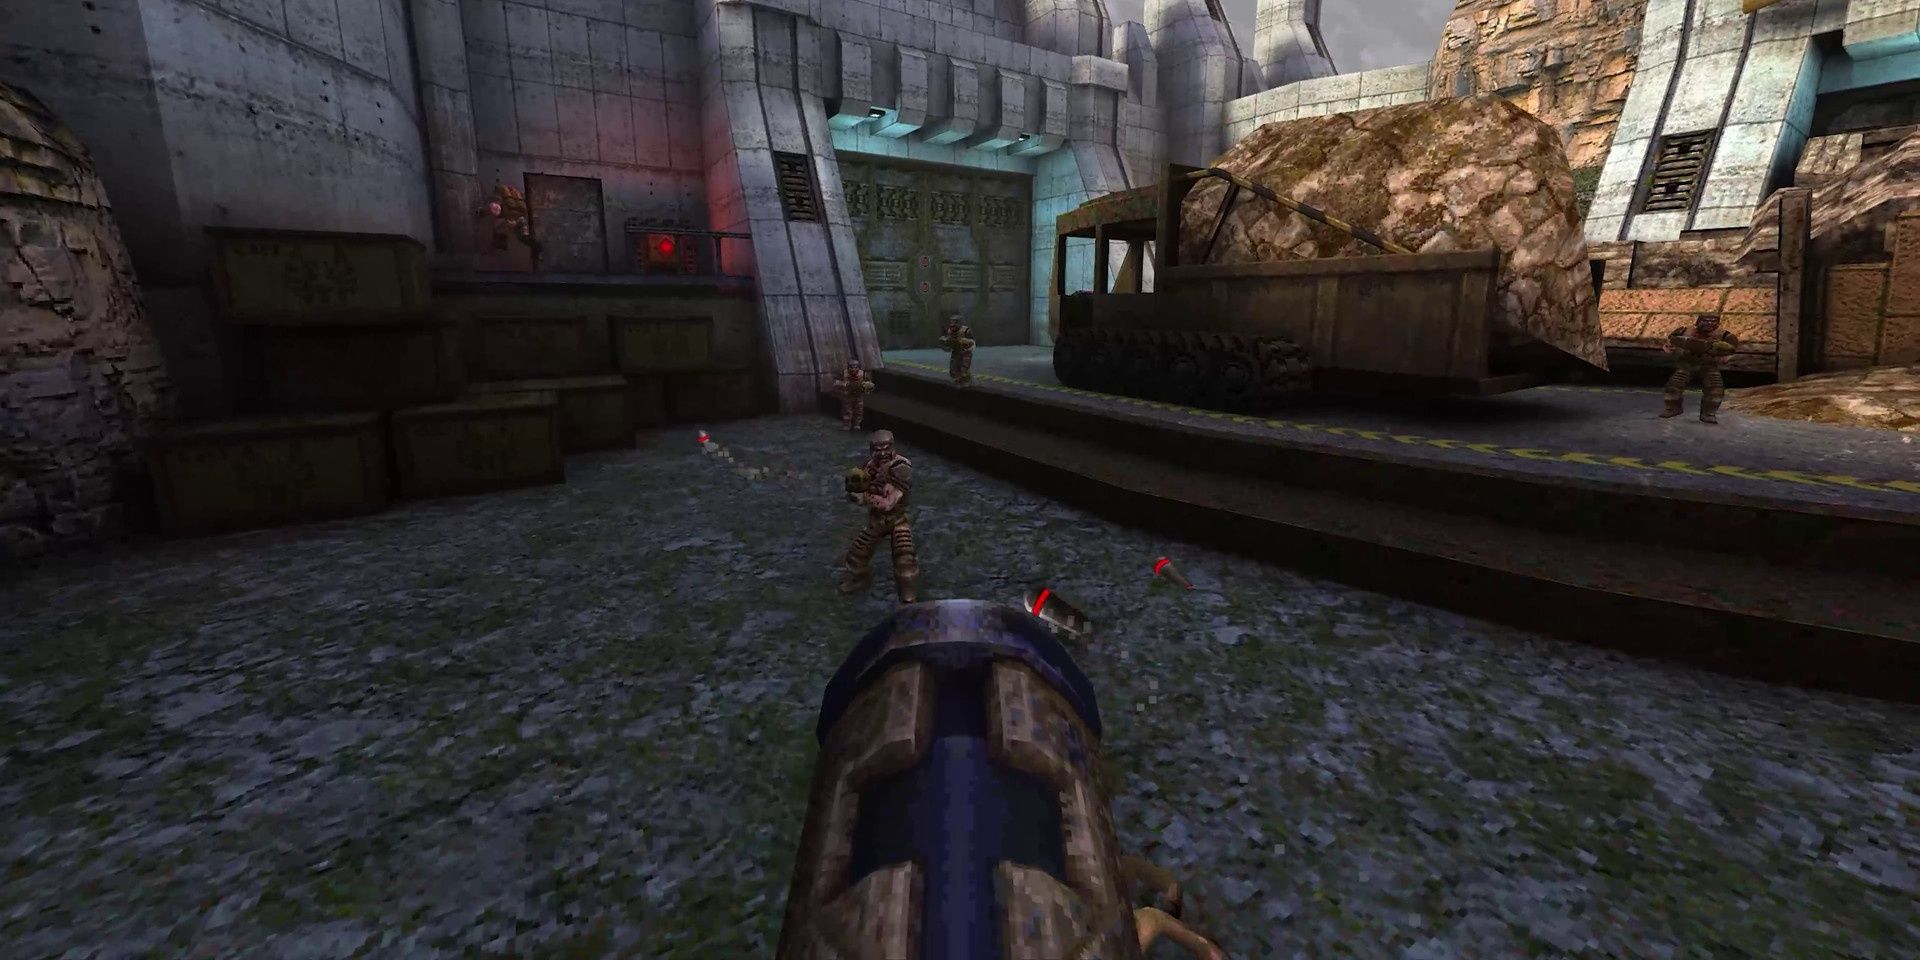 A screenshot showing gameplay in the Quake remaster